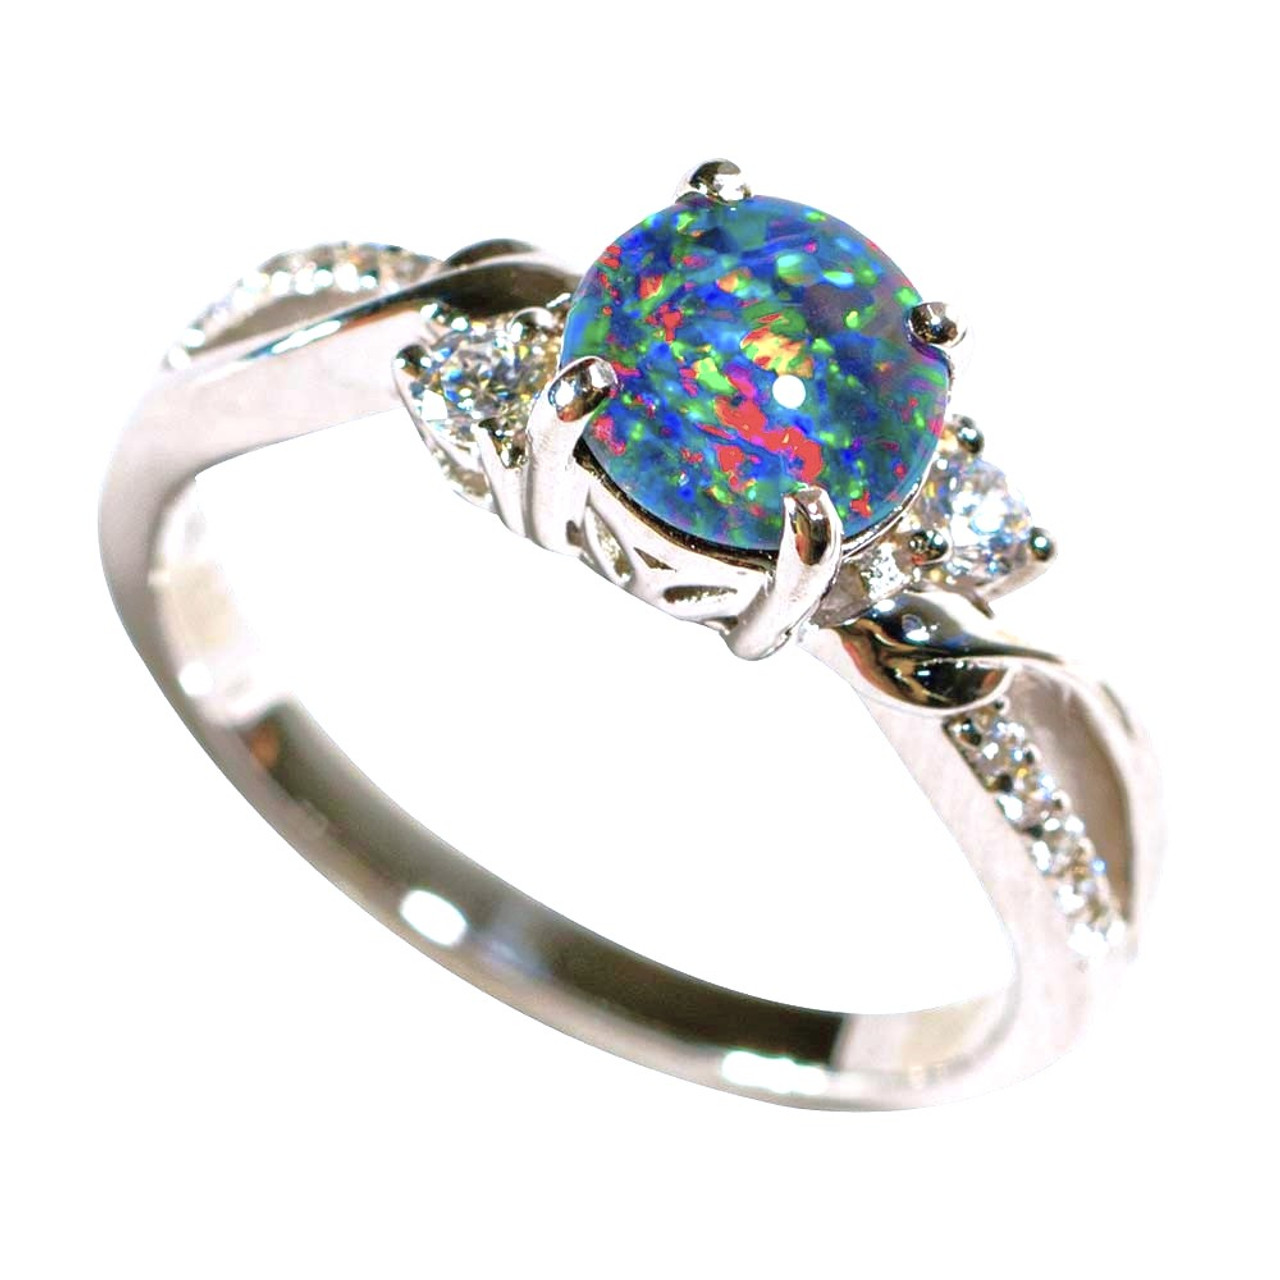 My Australian Opal Ring in Natural Light! : r/jewelry